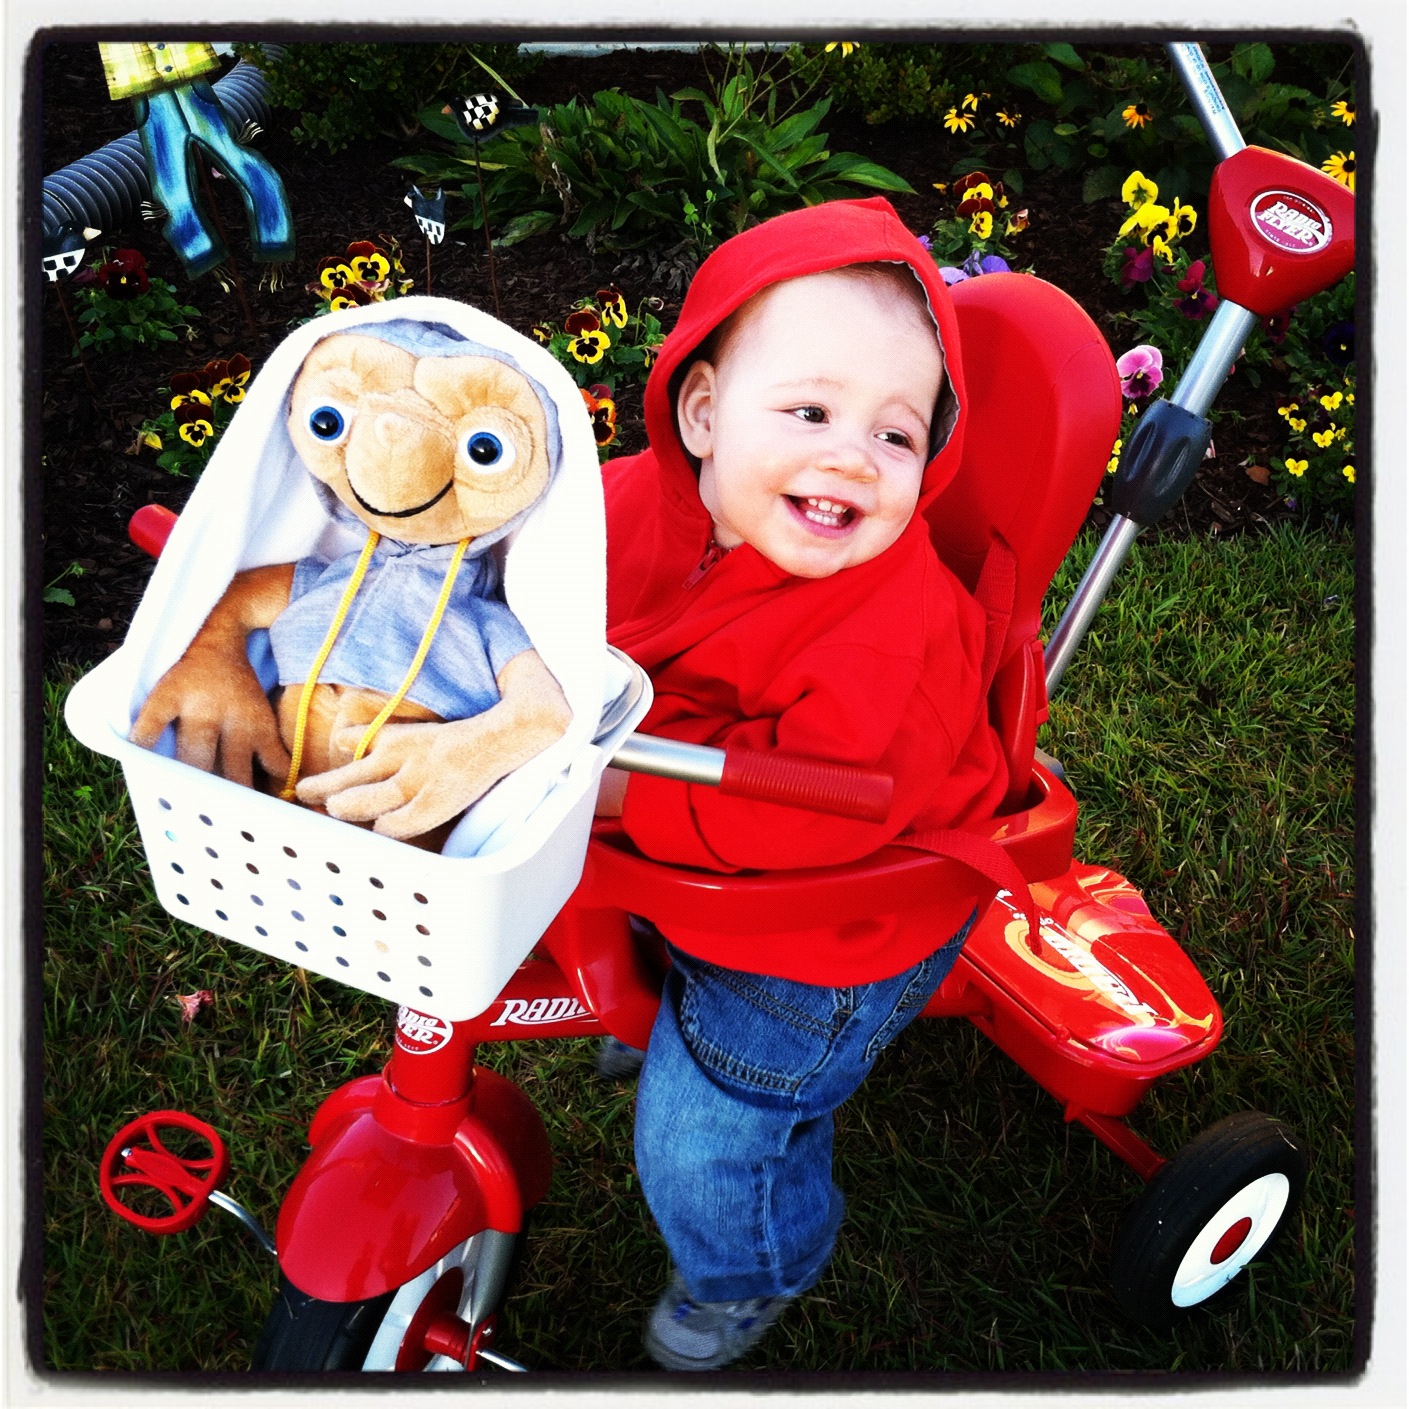 E.T. Costume for Toddlers